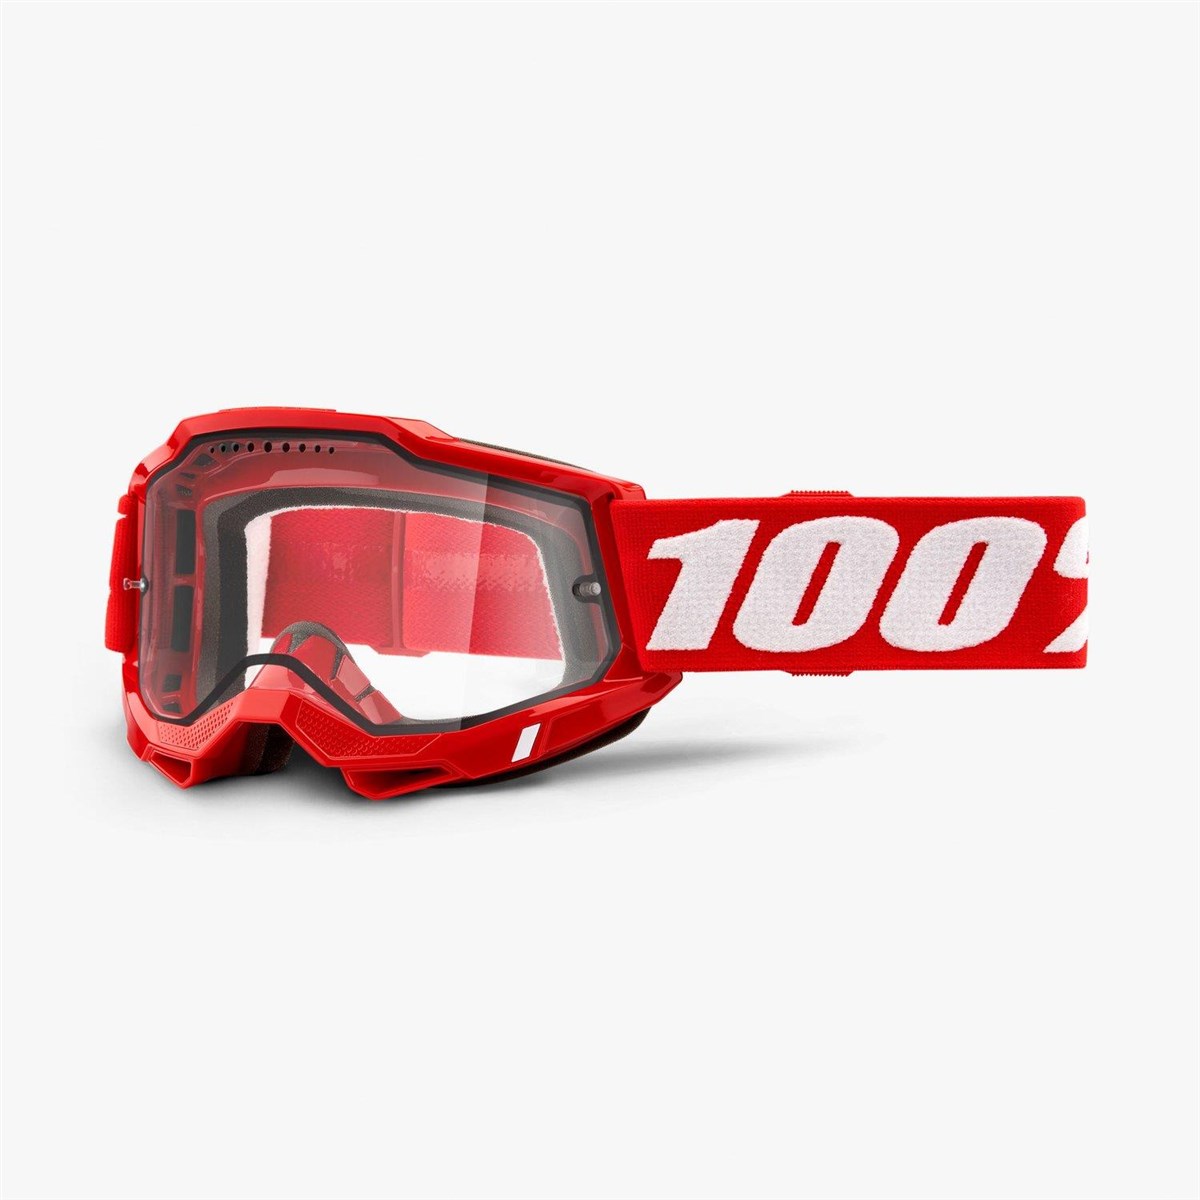 100% Accuri 2 Enduro MTB Cycling Goggles - Clear Lens product image